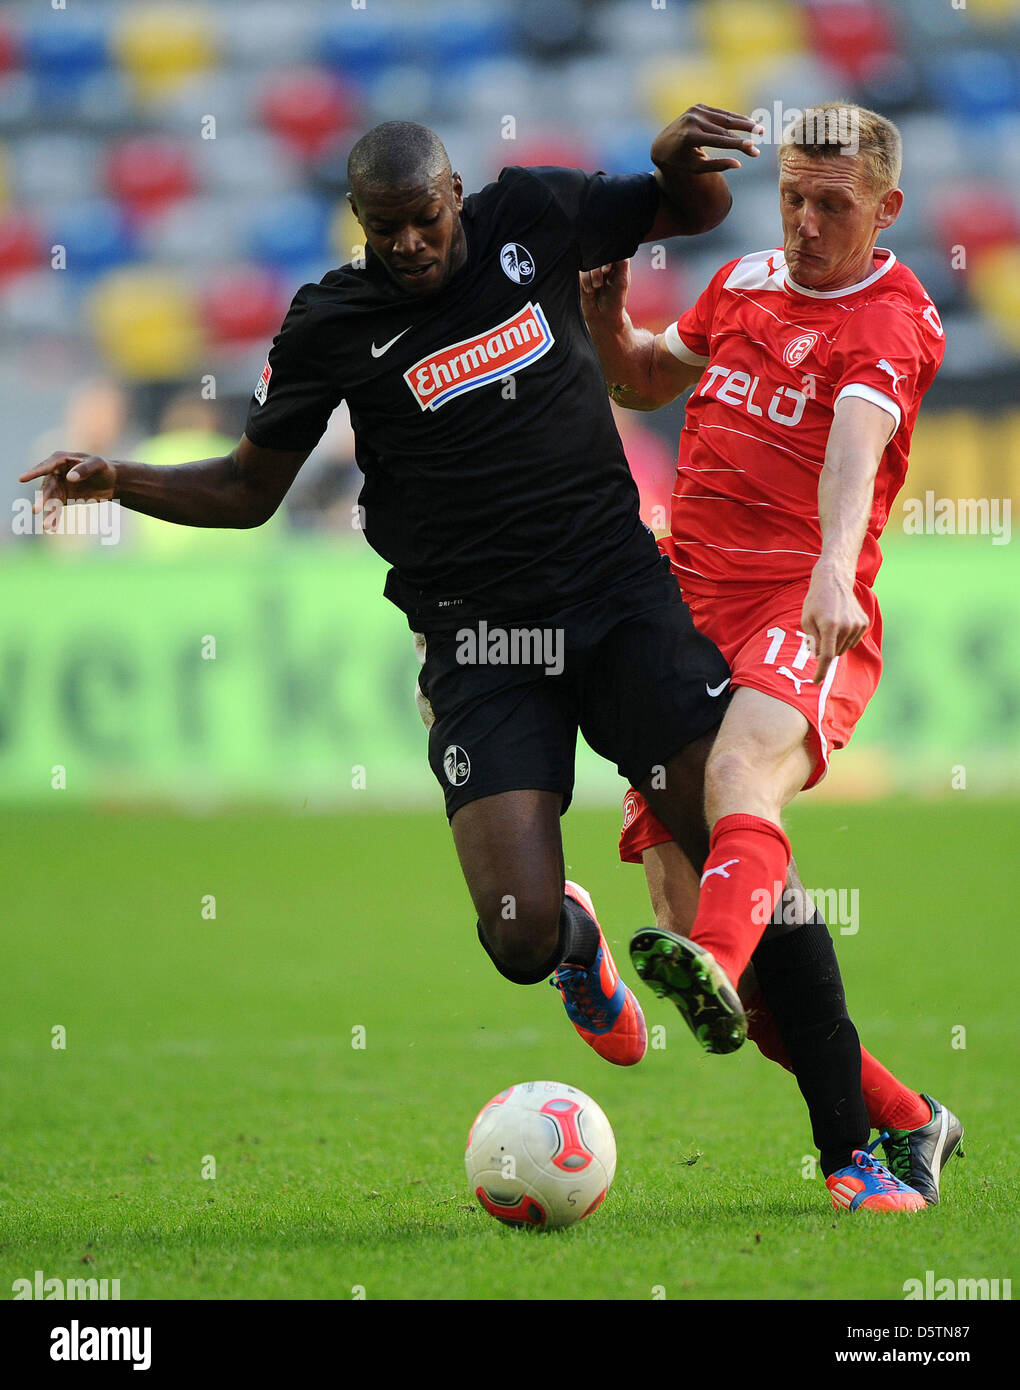 Duesseldorf's Axel Bellinghausen (R) and Freiburg's Karim Guede vie for the ball during the German Bundesliga soccer match Fortuna Duesseldorf vs SC Freiburg at Esprit Arena in Duesseldorf, Germany, 22 September 2012. Photo: Jonas Guettler Stock Photo